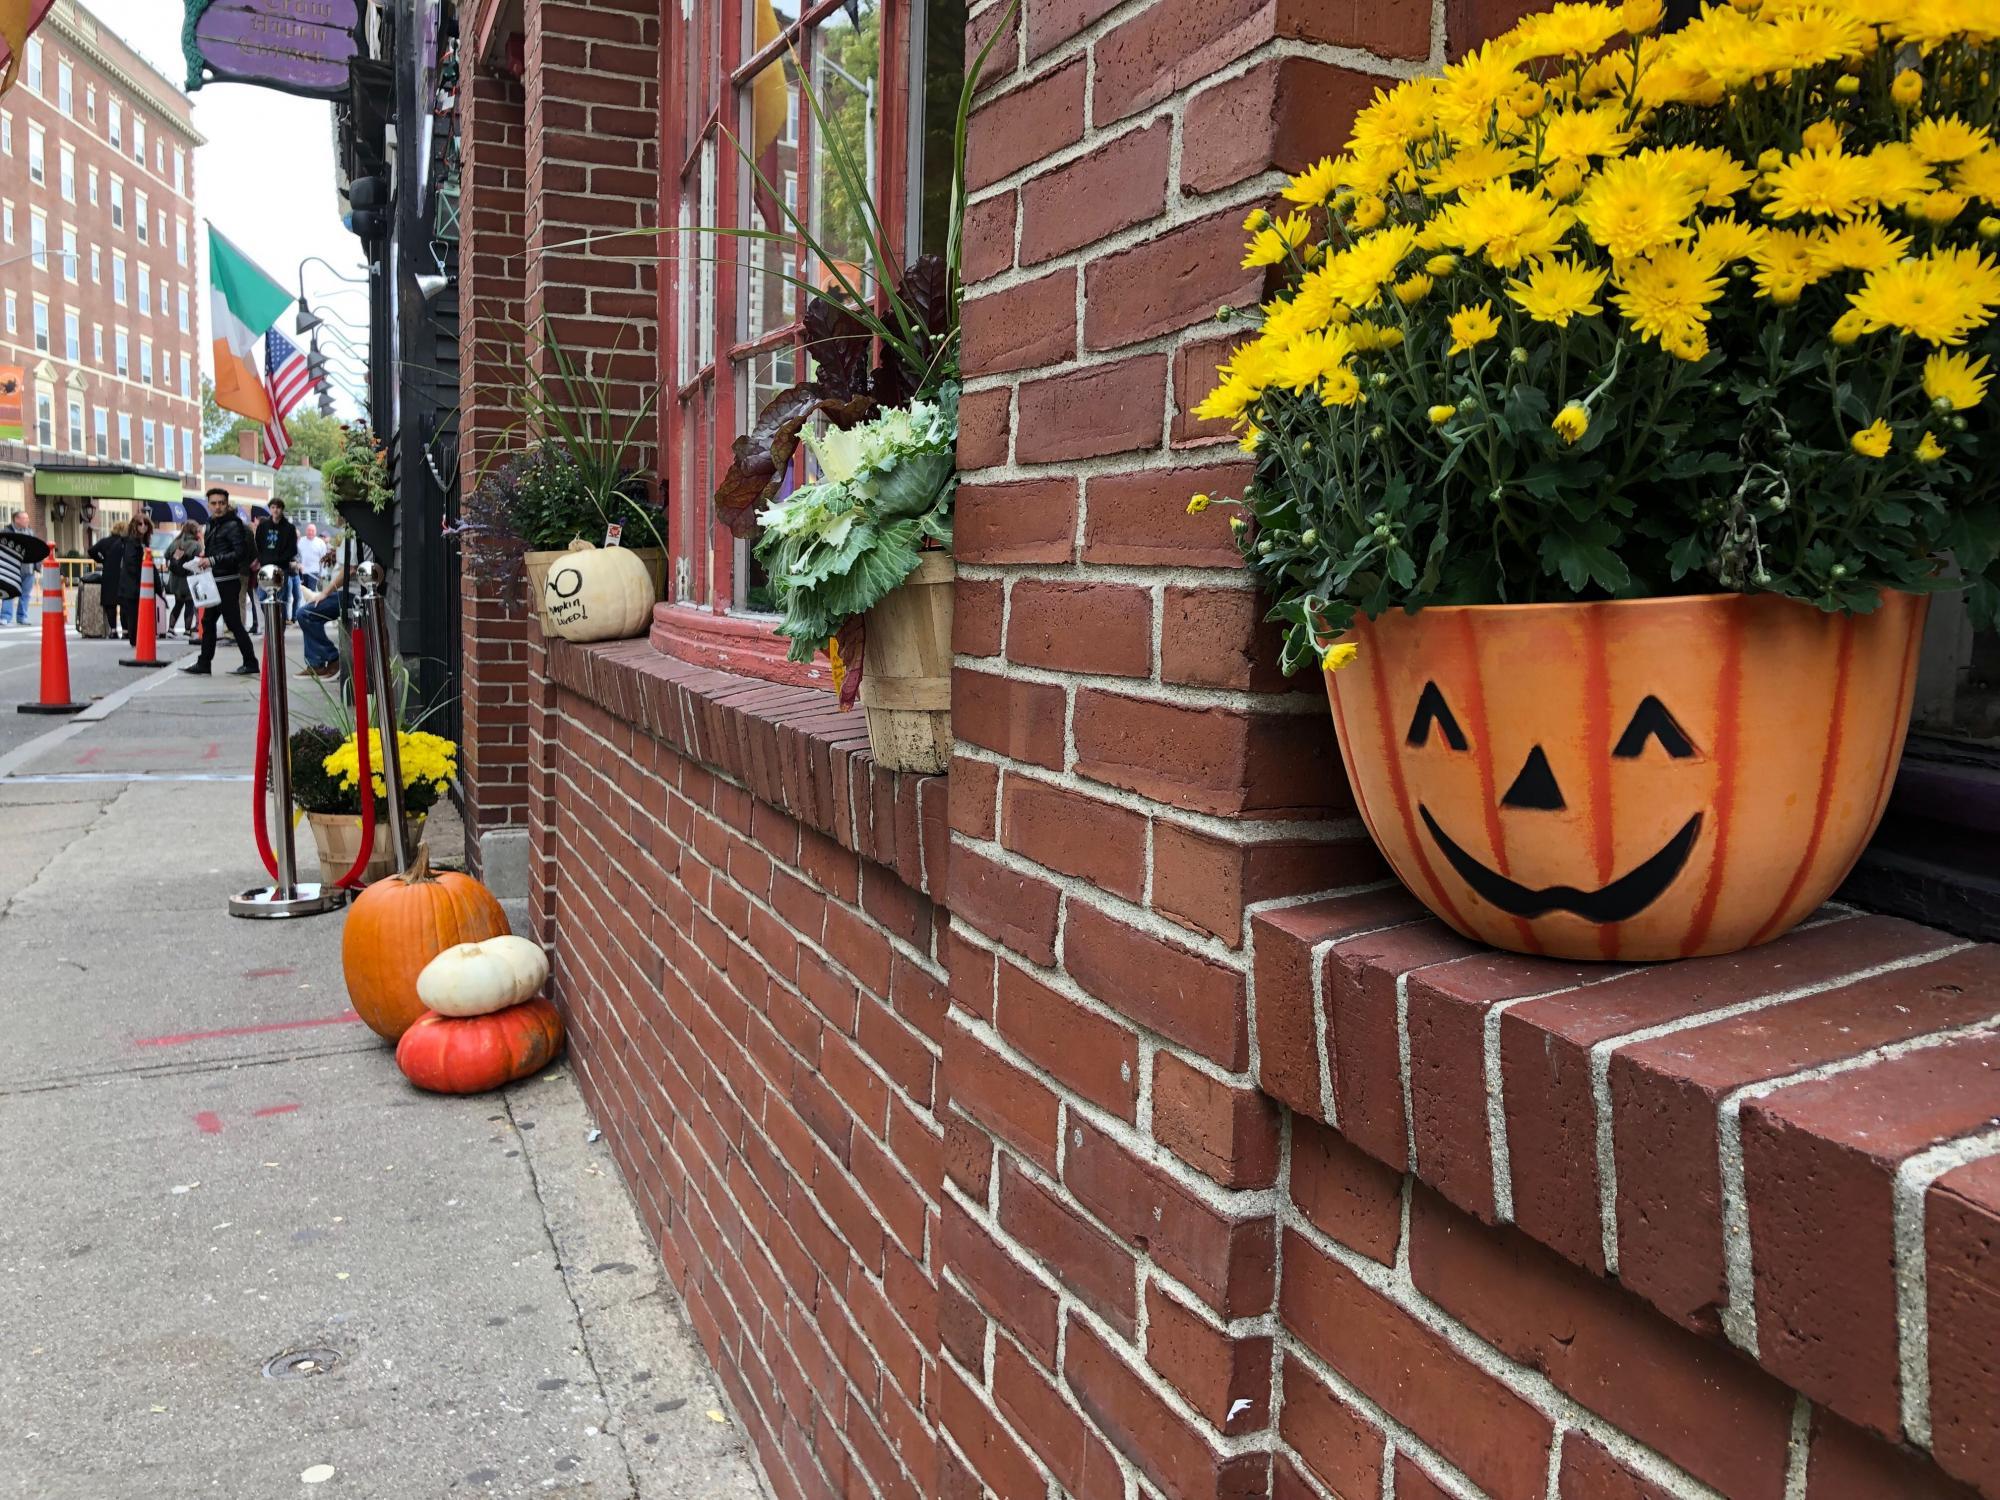 In Salem, a jack-o-lantern planter with flowers sits in a windowsill, with the weekend crowd in the background